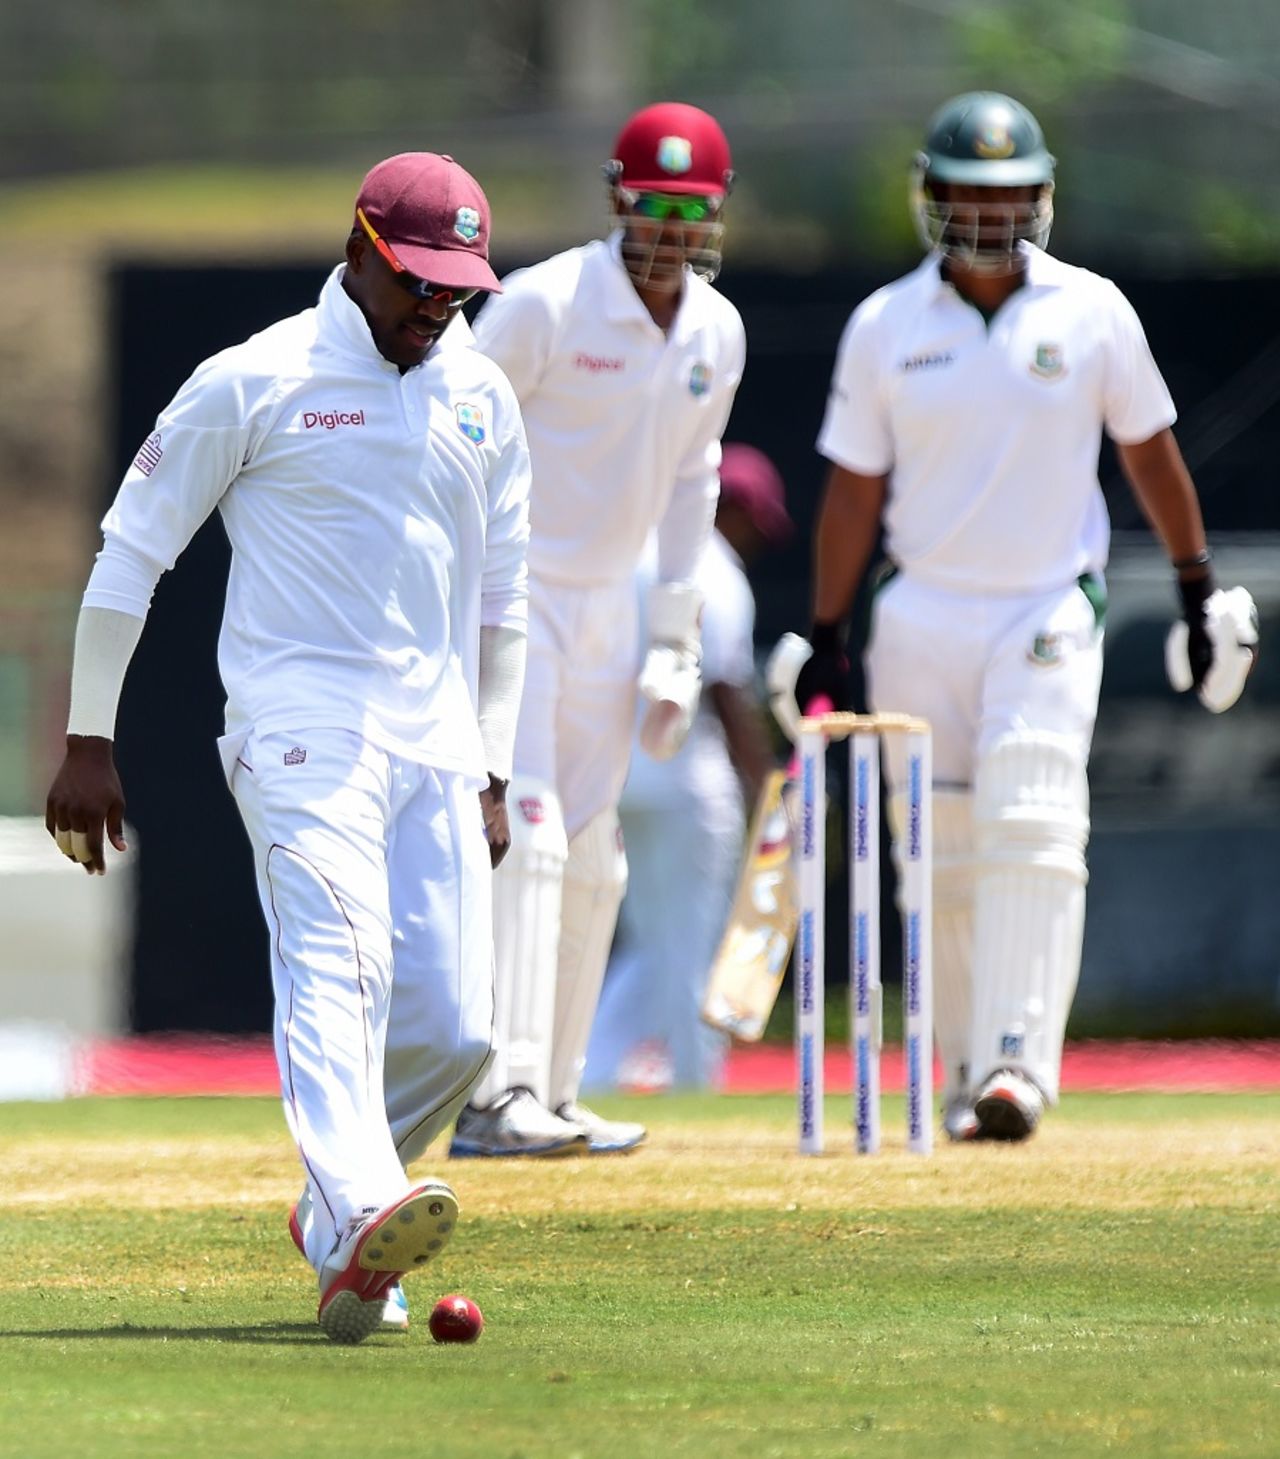 Darren Bravo dropped Mominul Haque at first slip, West Indies v Bangladesh, 2nd Test, St. Lucia, 4th day, September 16, 2014